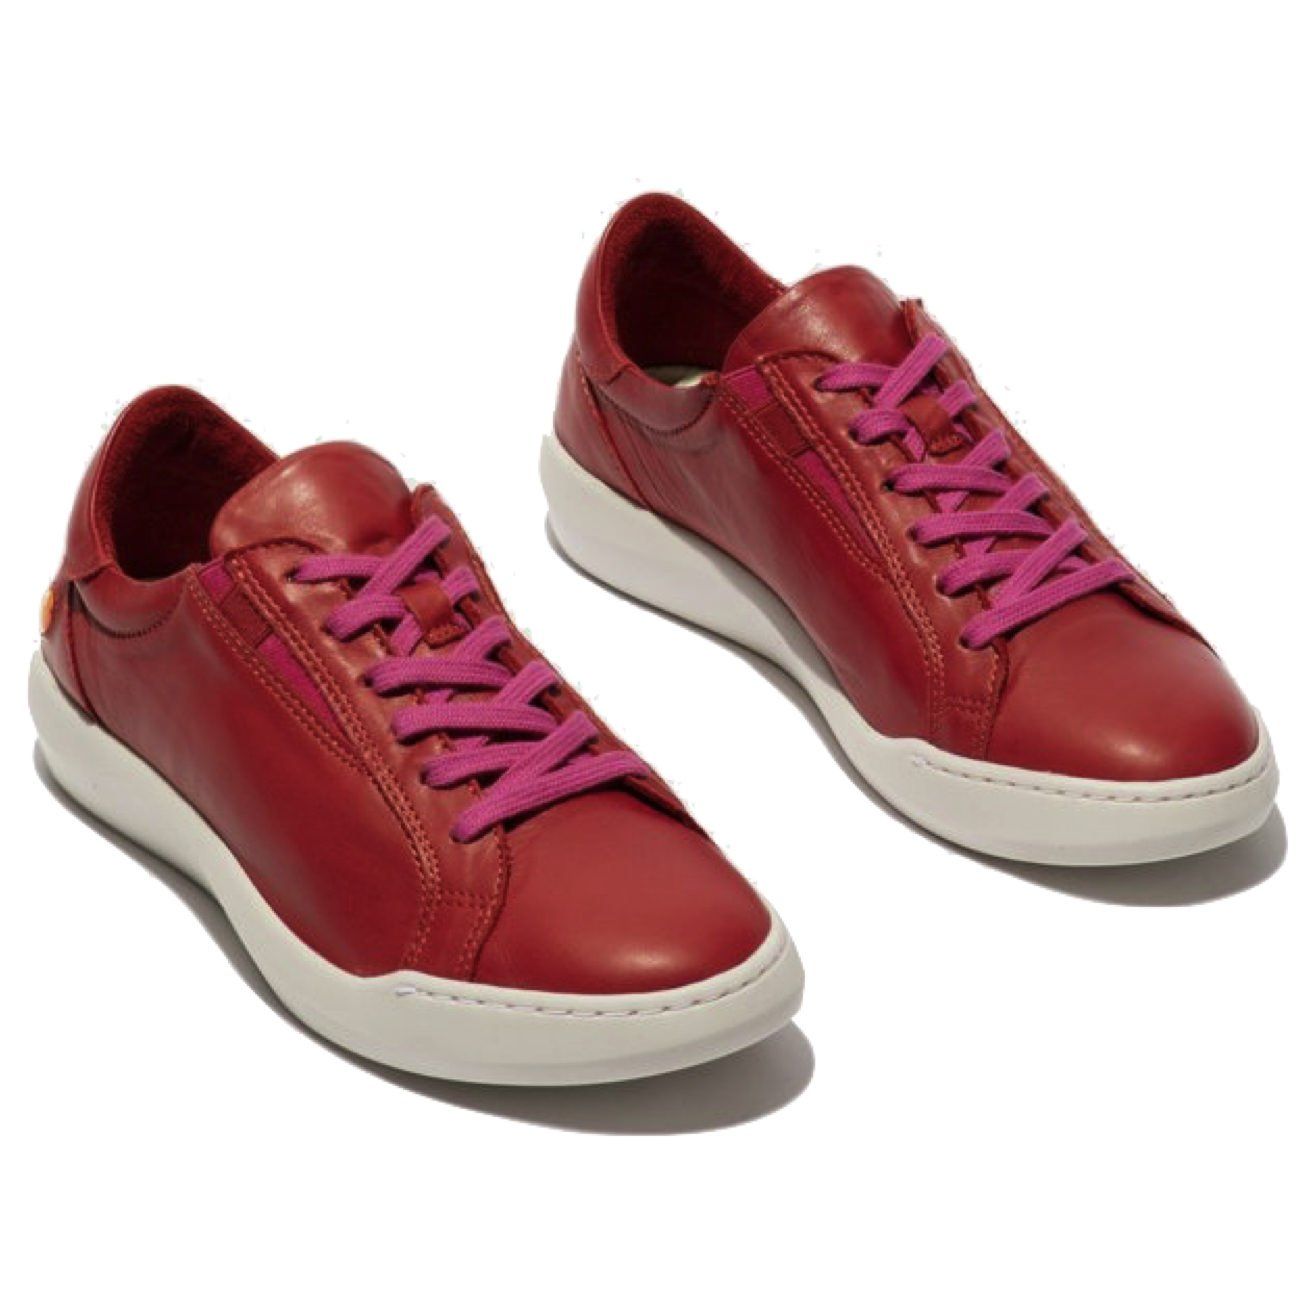 Softinos, Belv639, Laceup Shoe, Supple Leather, Cherry Red Shoes Softinos Cherry Red 36 